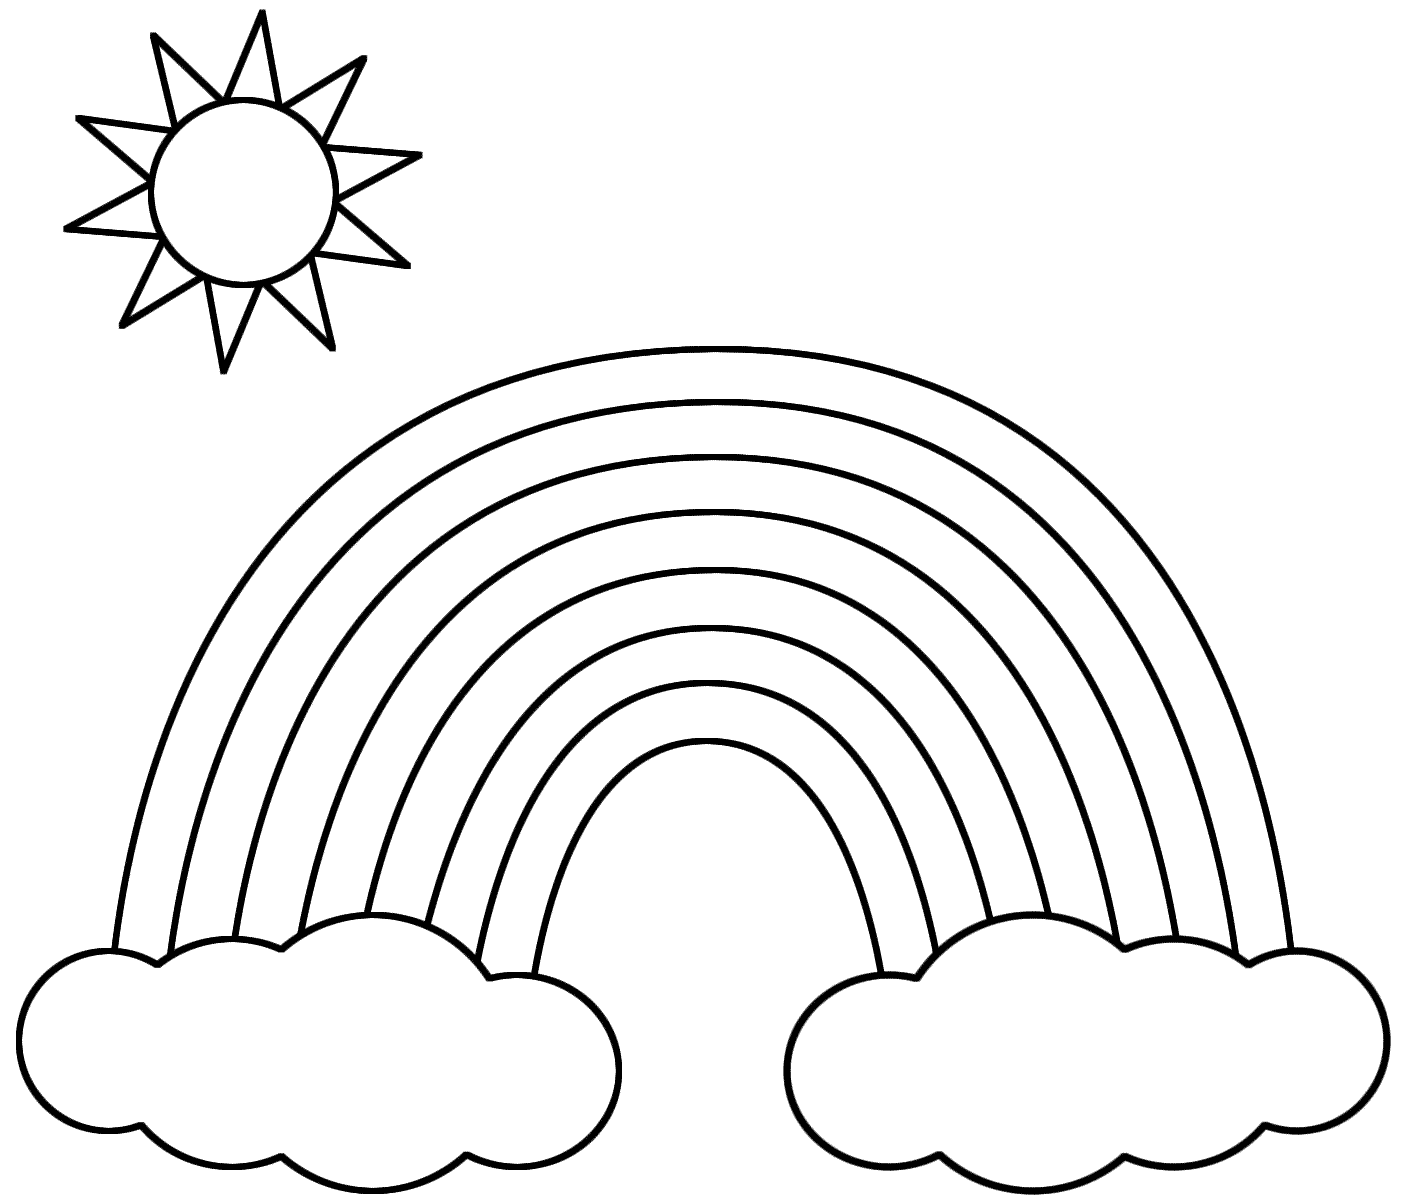 Rainbows Coloring Page | Only Coloring Pages - Coloring Home